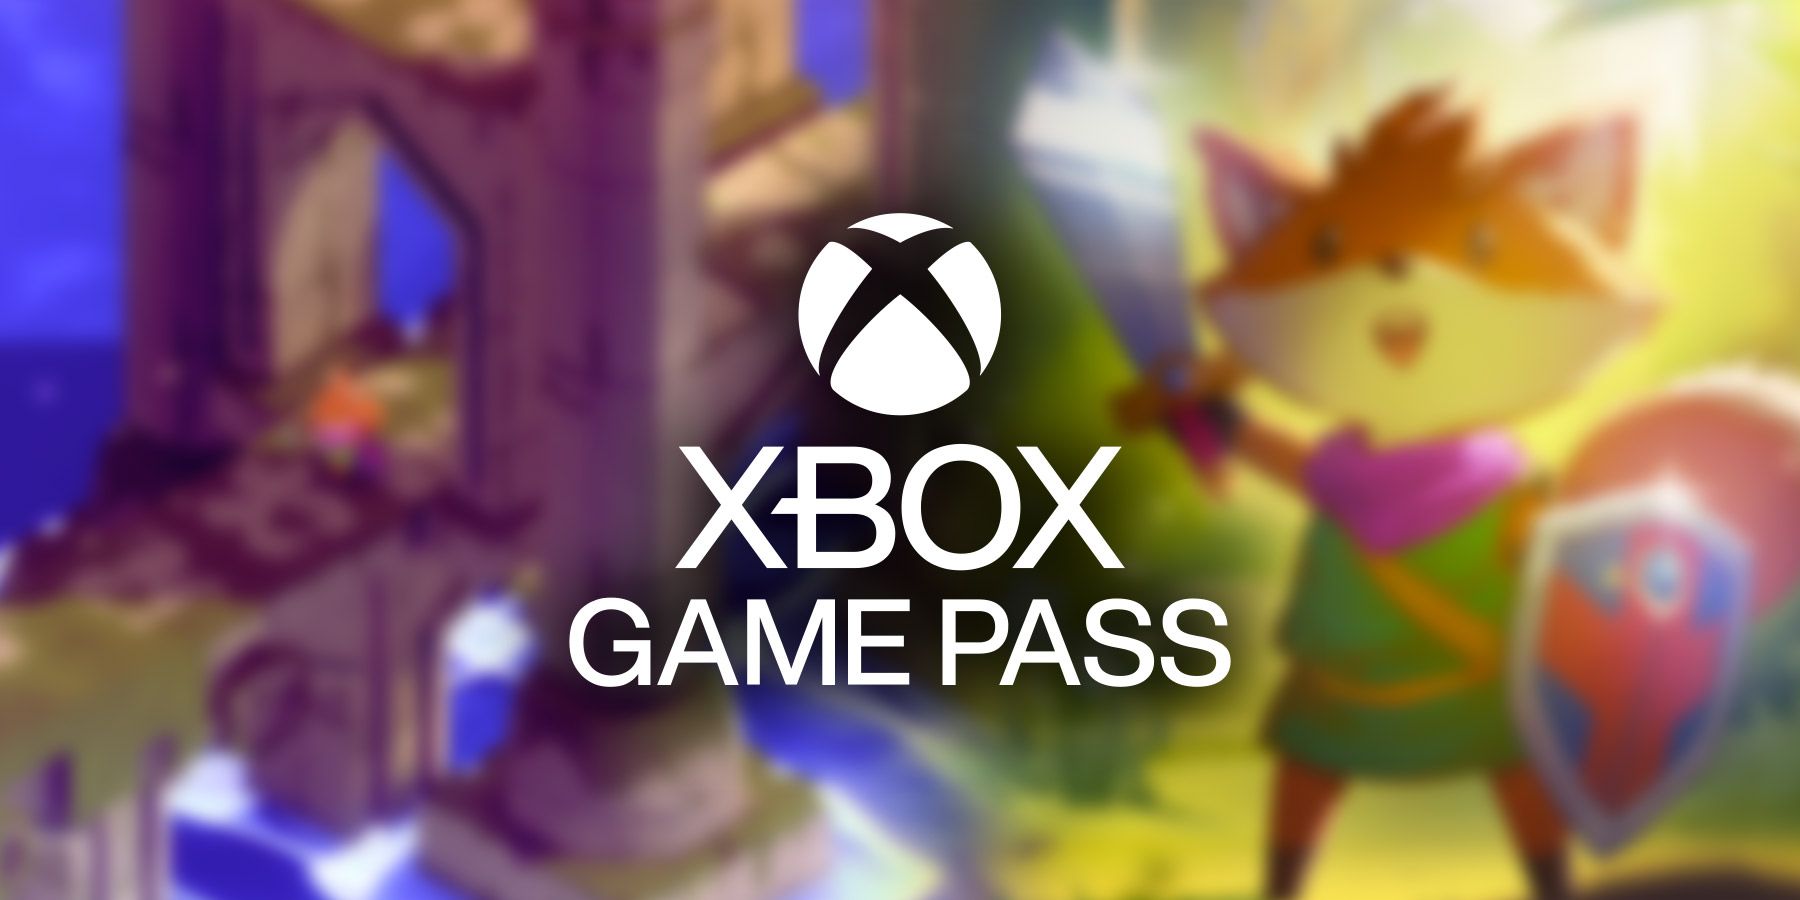 March 2022 Xbox Game Pass More Exciting